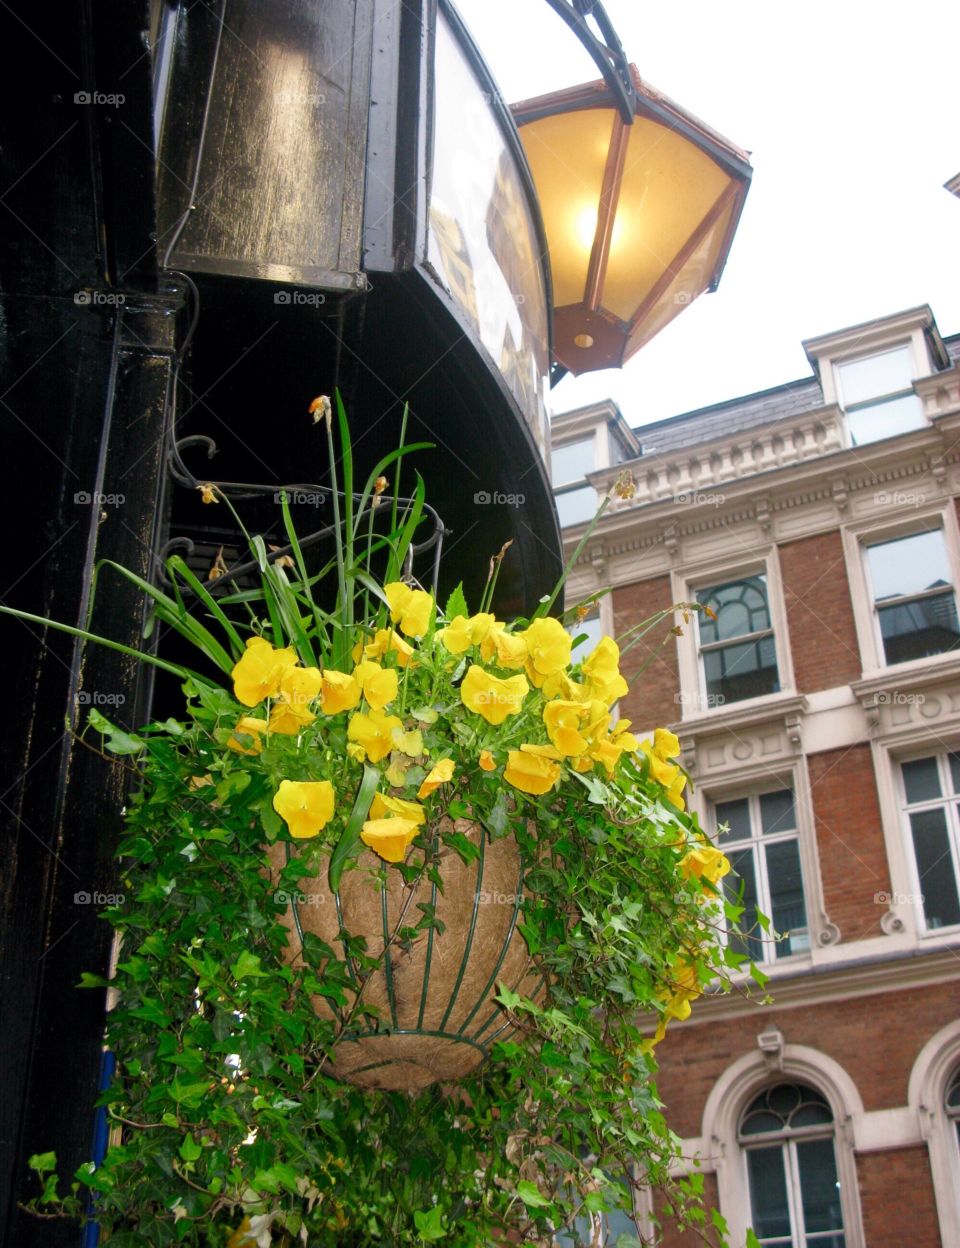 London Building with street light and hanging flowers